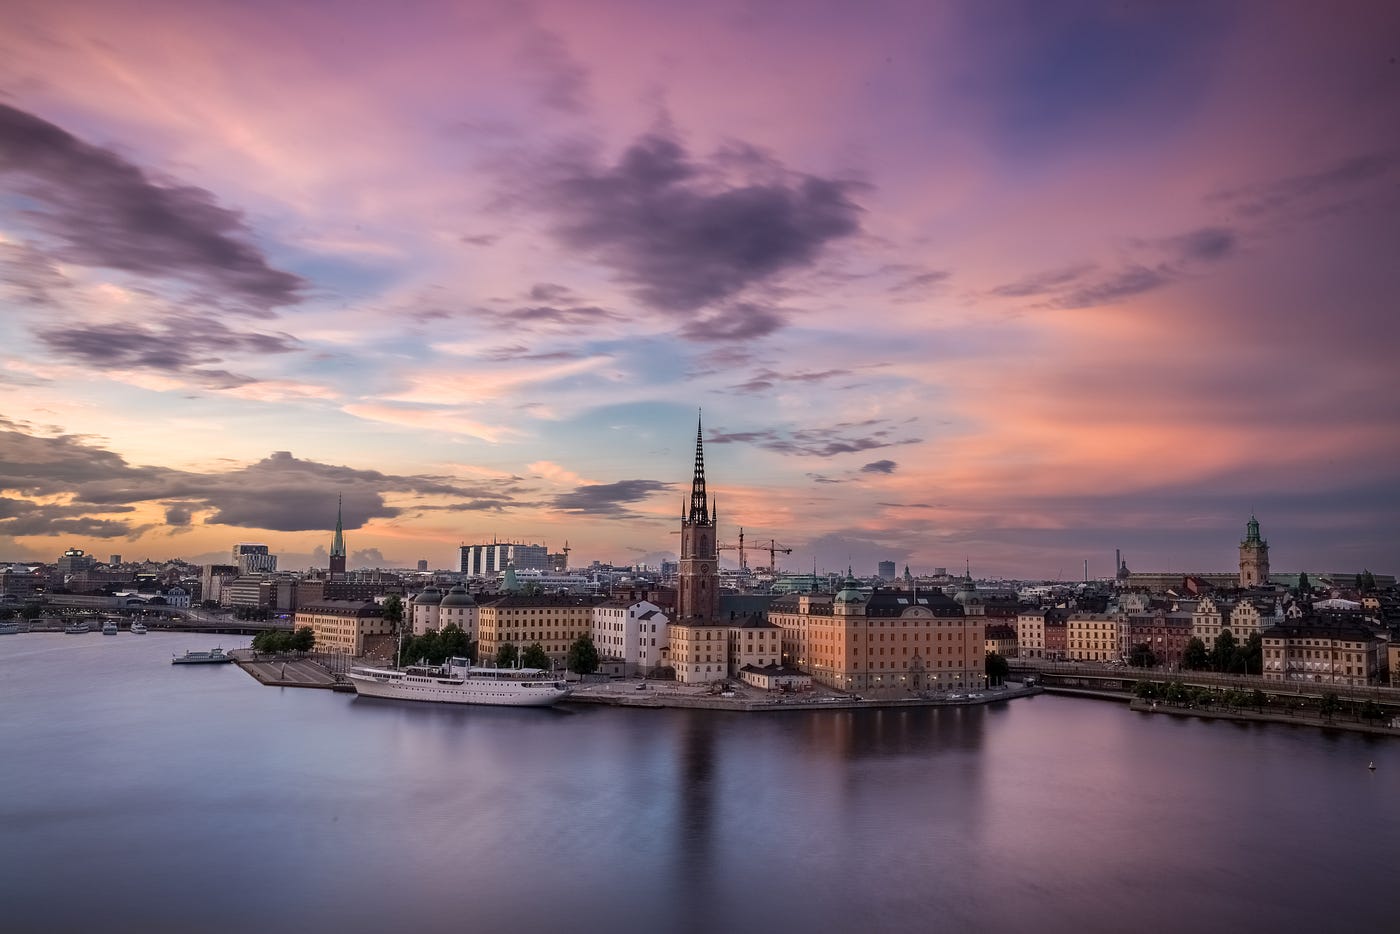 A beautiful photo of Stockholm at late sunset.